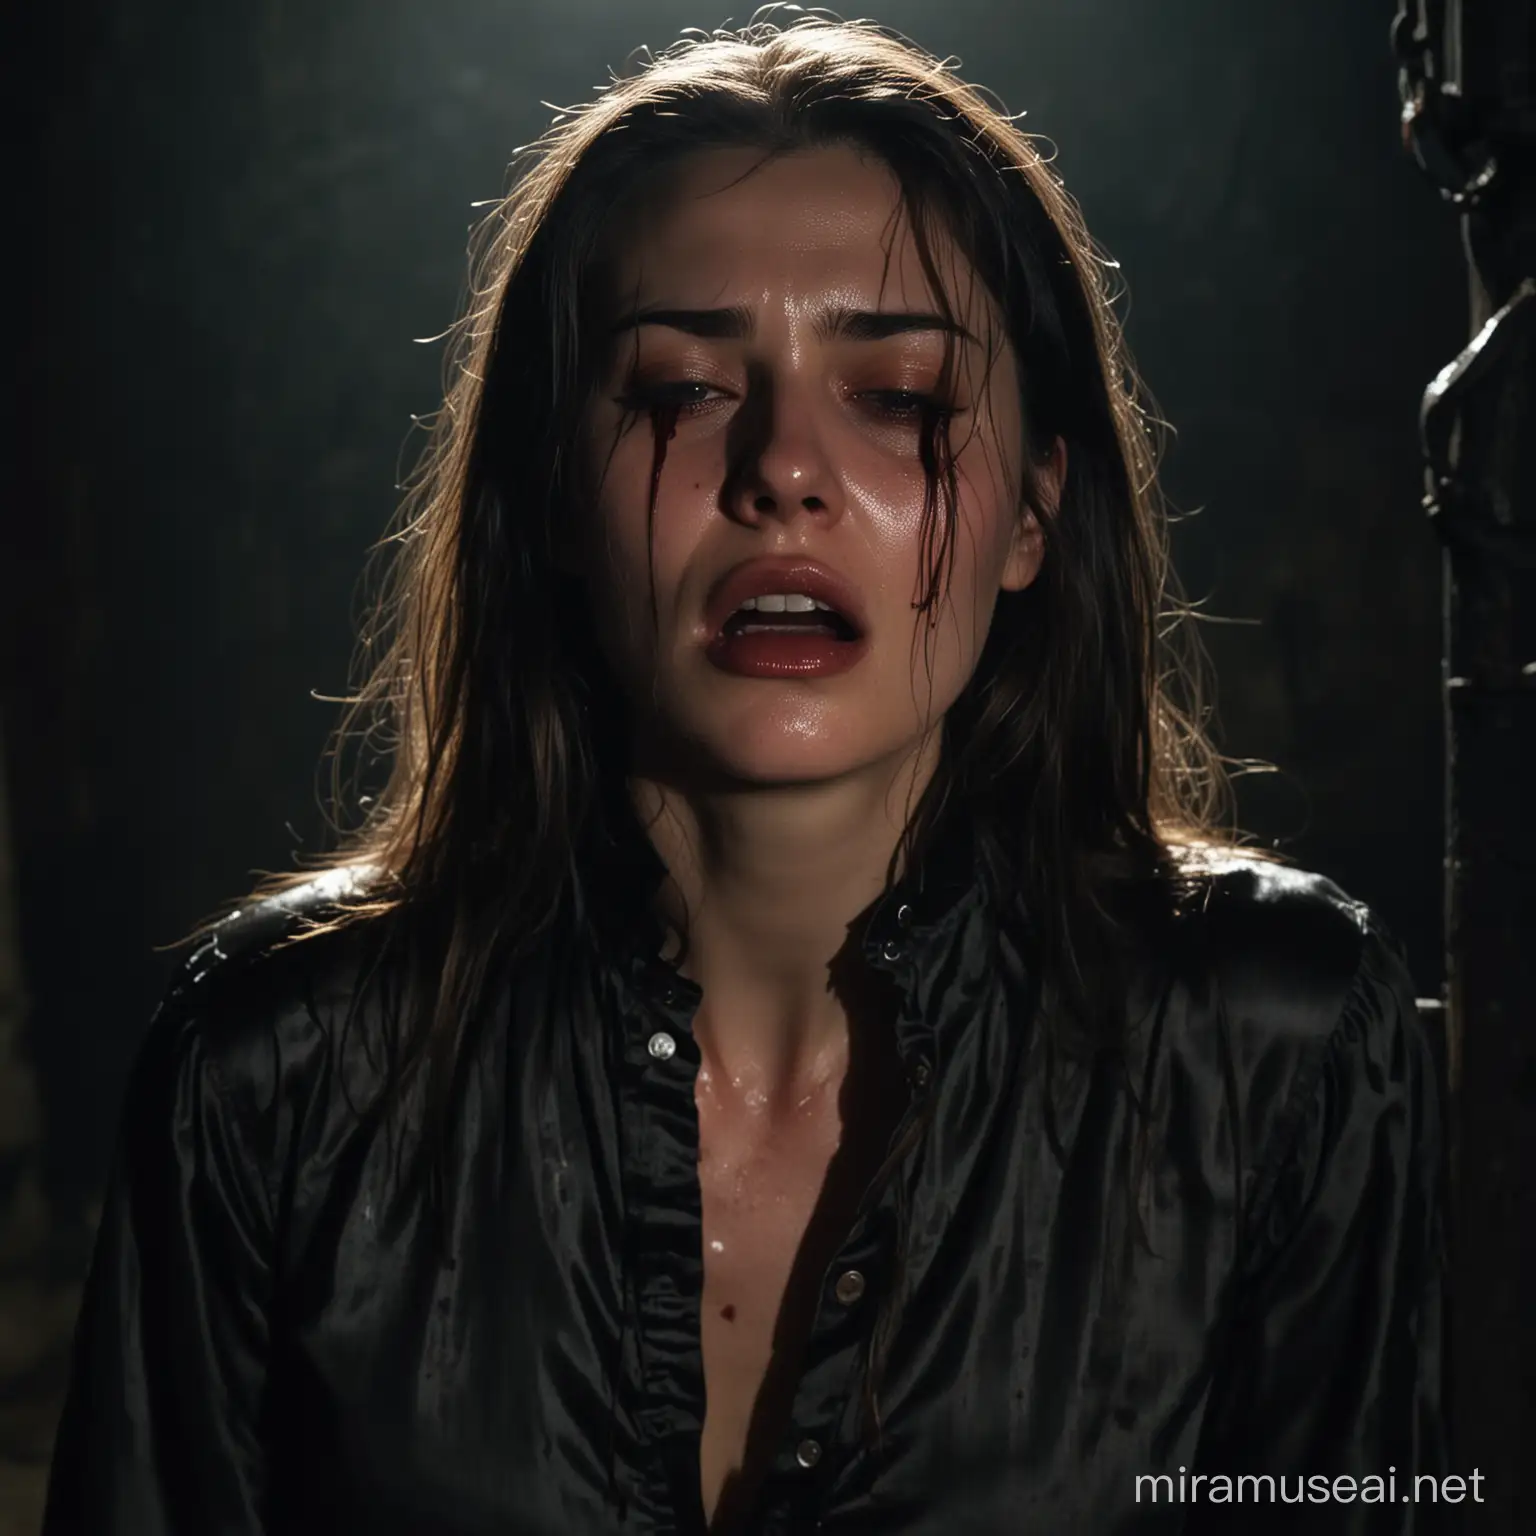 A gorgeous model is being tortured. She wears a long sleeve satin blouse. She is in a dark dungeon lit only by torchlight. She is crying in agony and sweaty. Her blouse is torn and dirty. Her lips are dry and cracked. No makeup. No lipstick. Her face is beaten and bloody. Dark circles are under her puffy eyes.